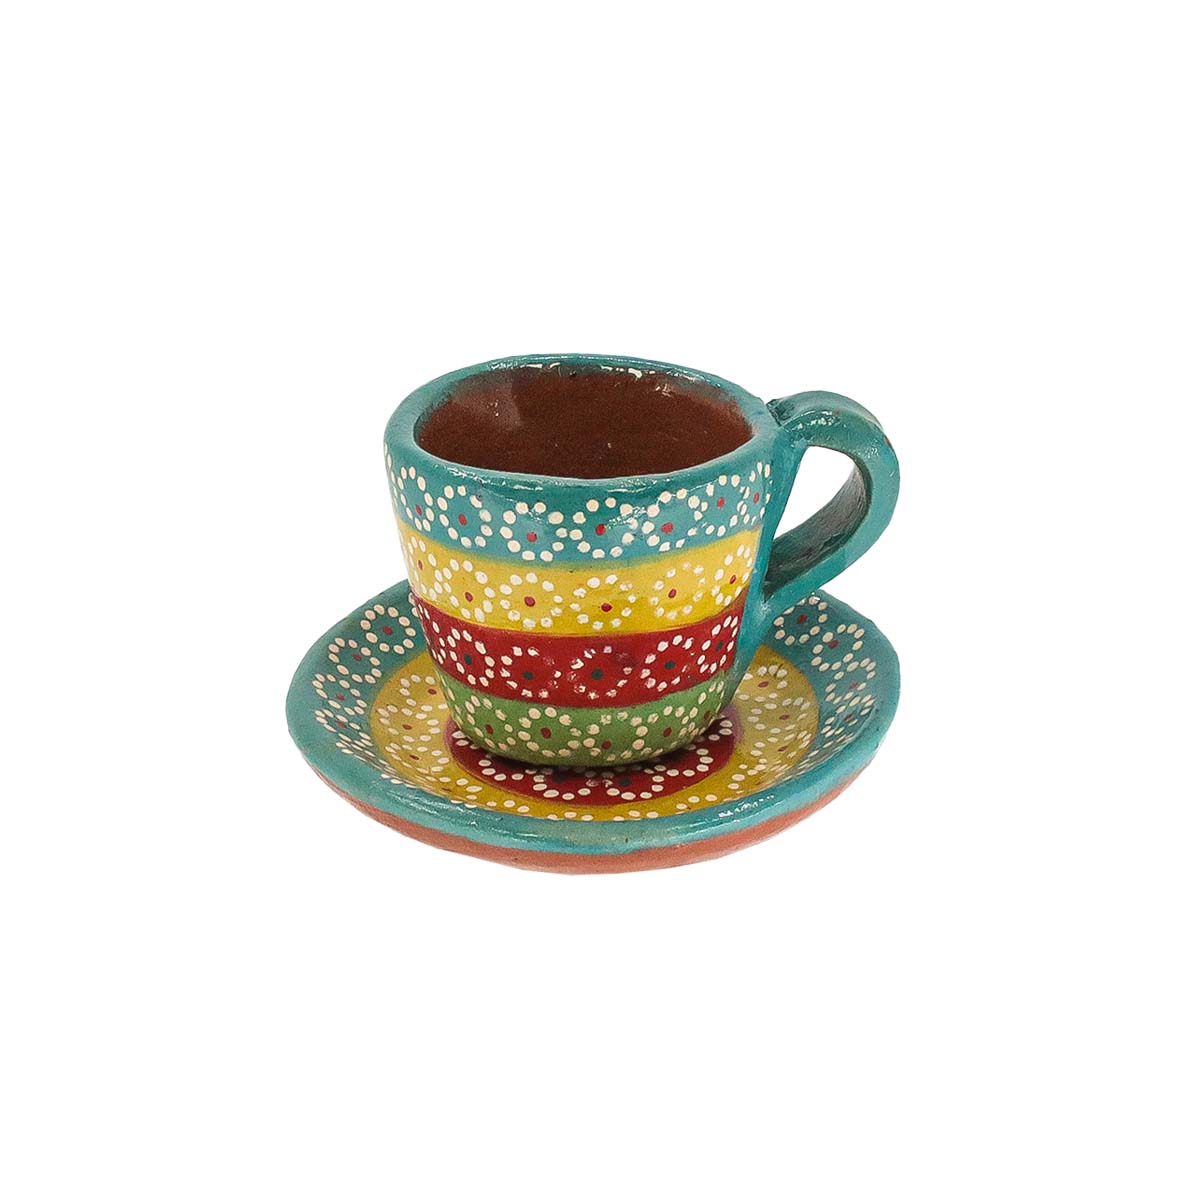 Capula Hand-Painted Espresso Cup with Saucer - 5